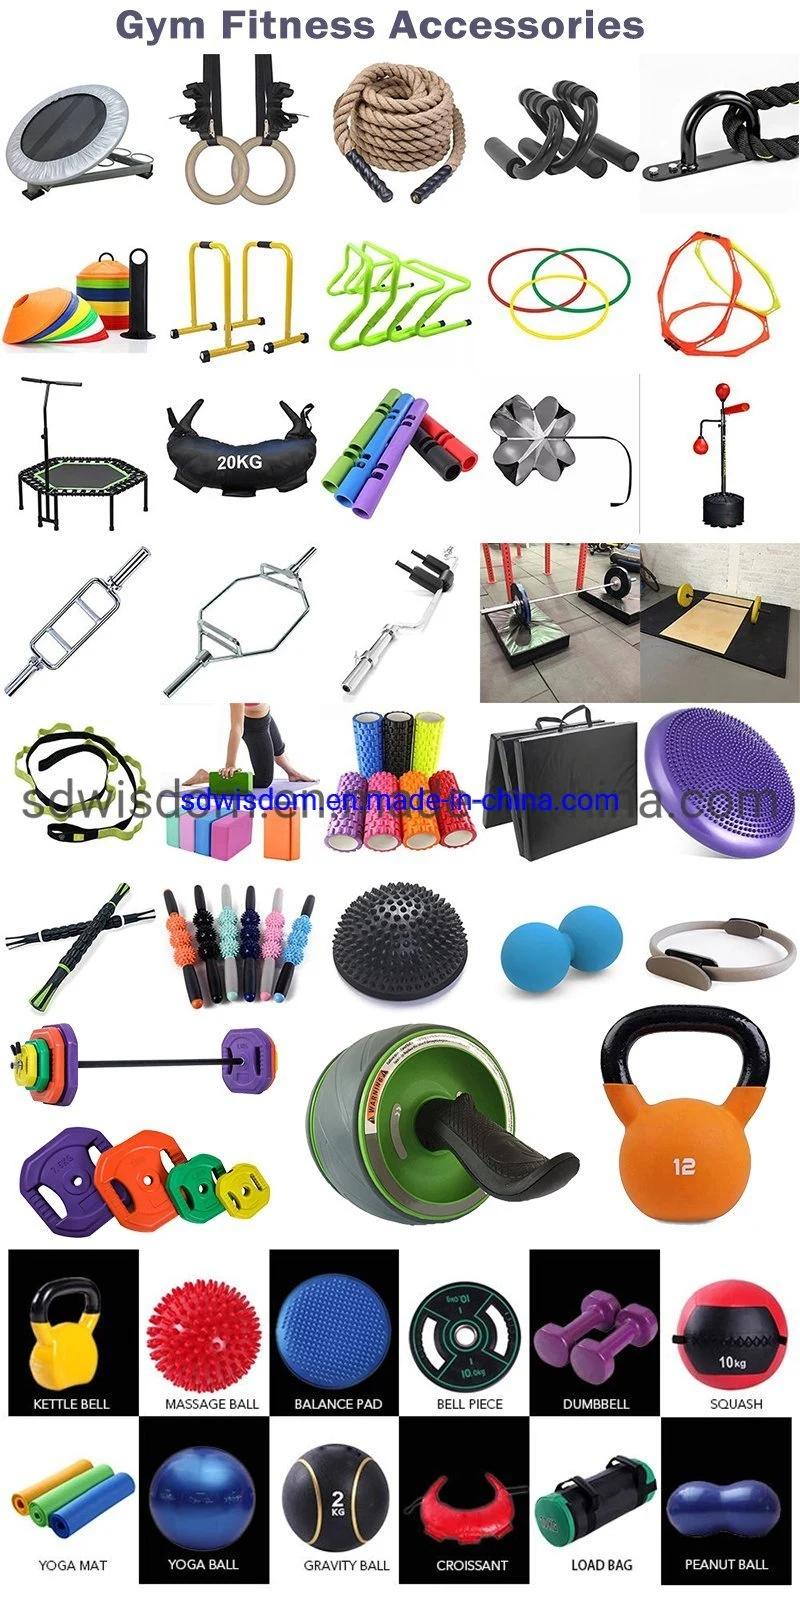 Commercial Fitness Equipment Heavy Duty Home Gym Machine Plate Loaded Seated Calf Raise